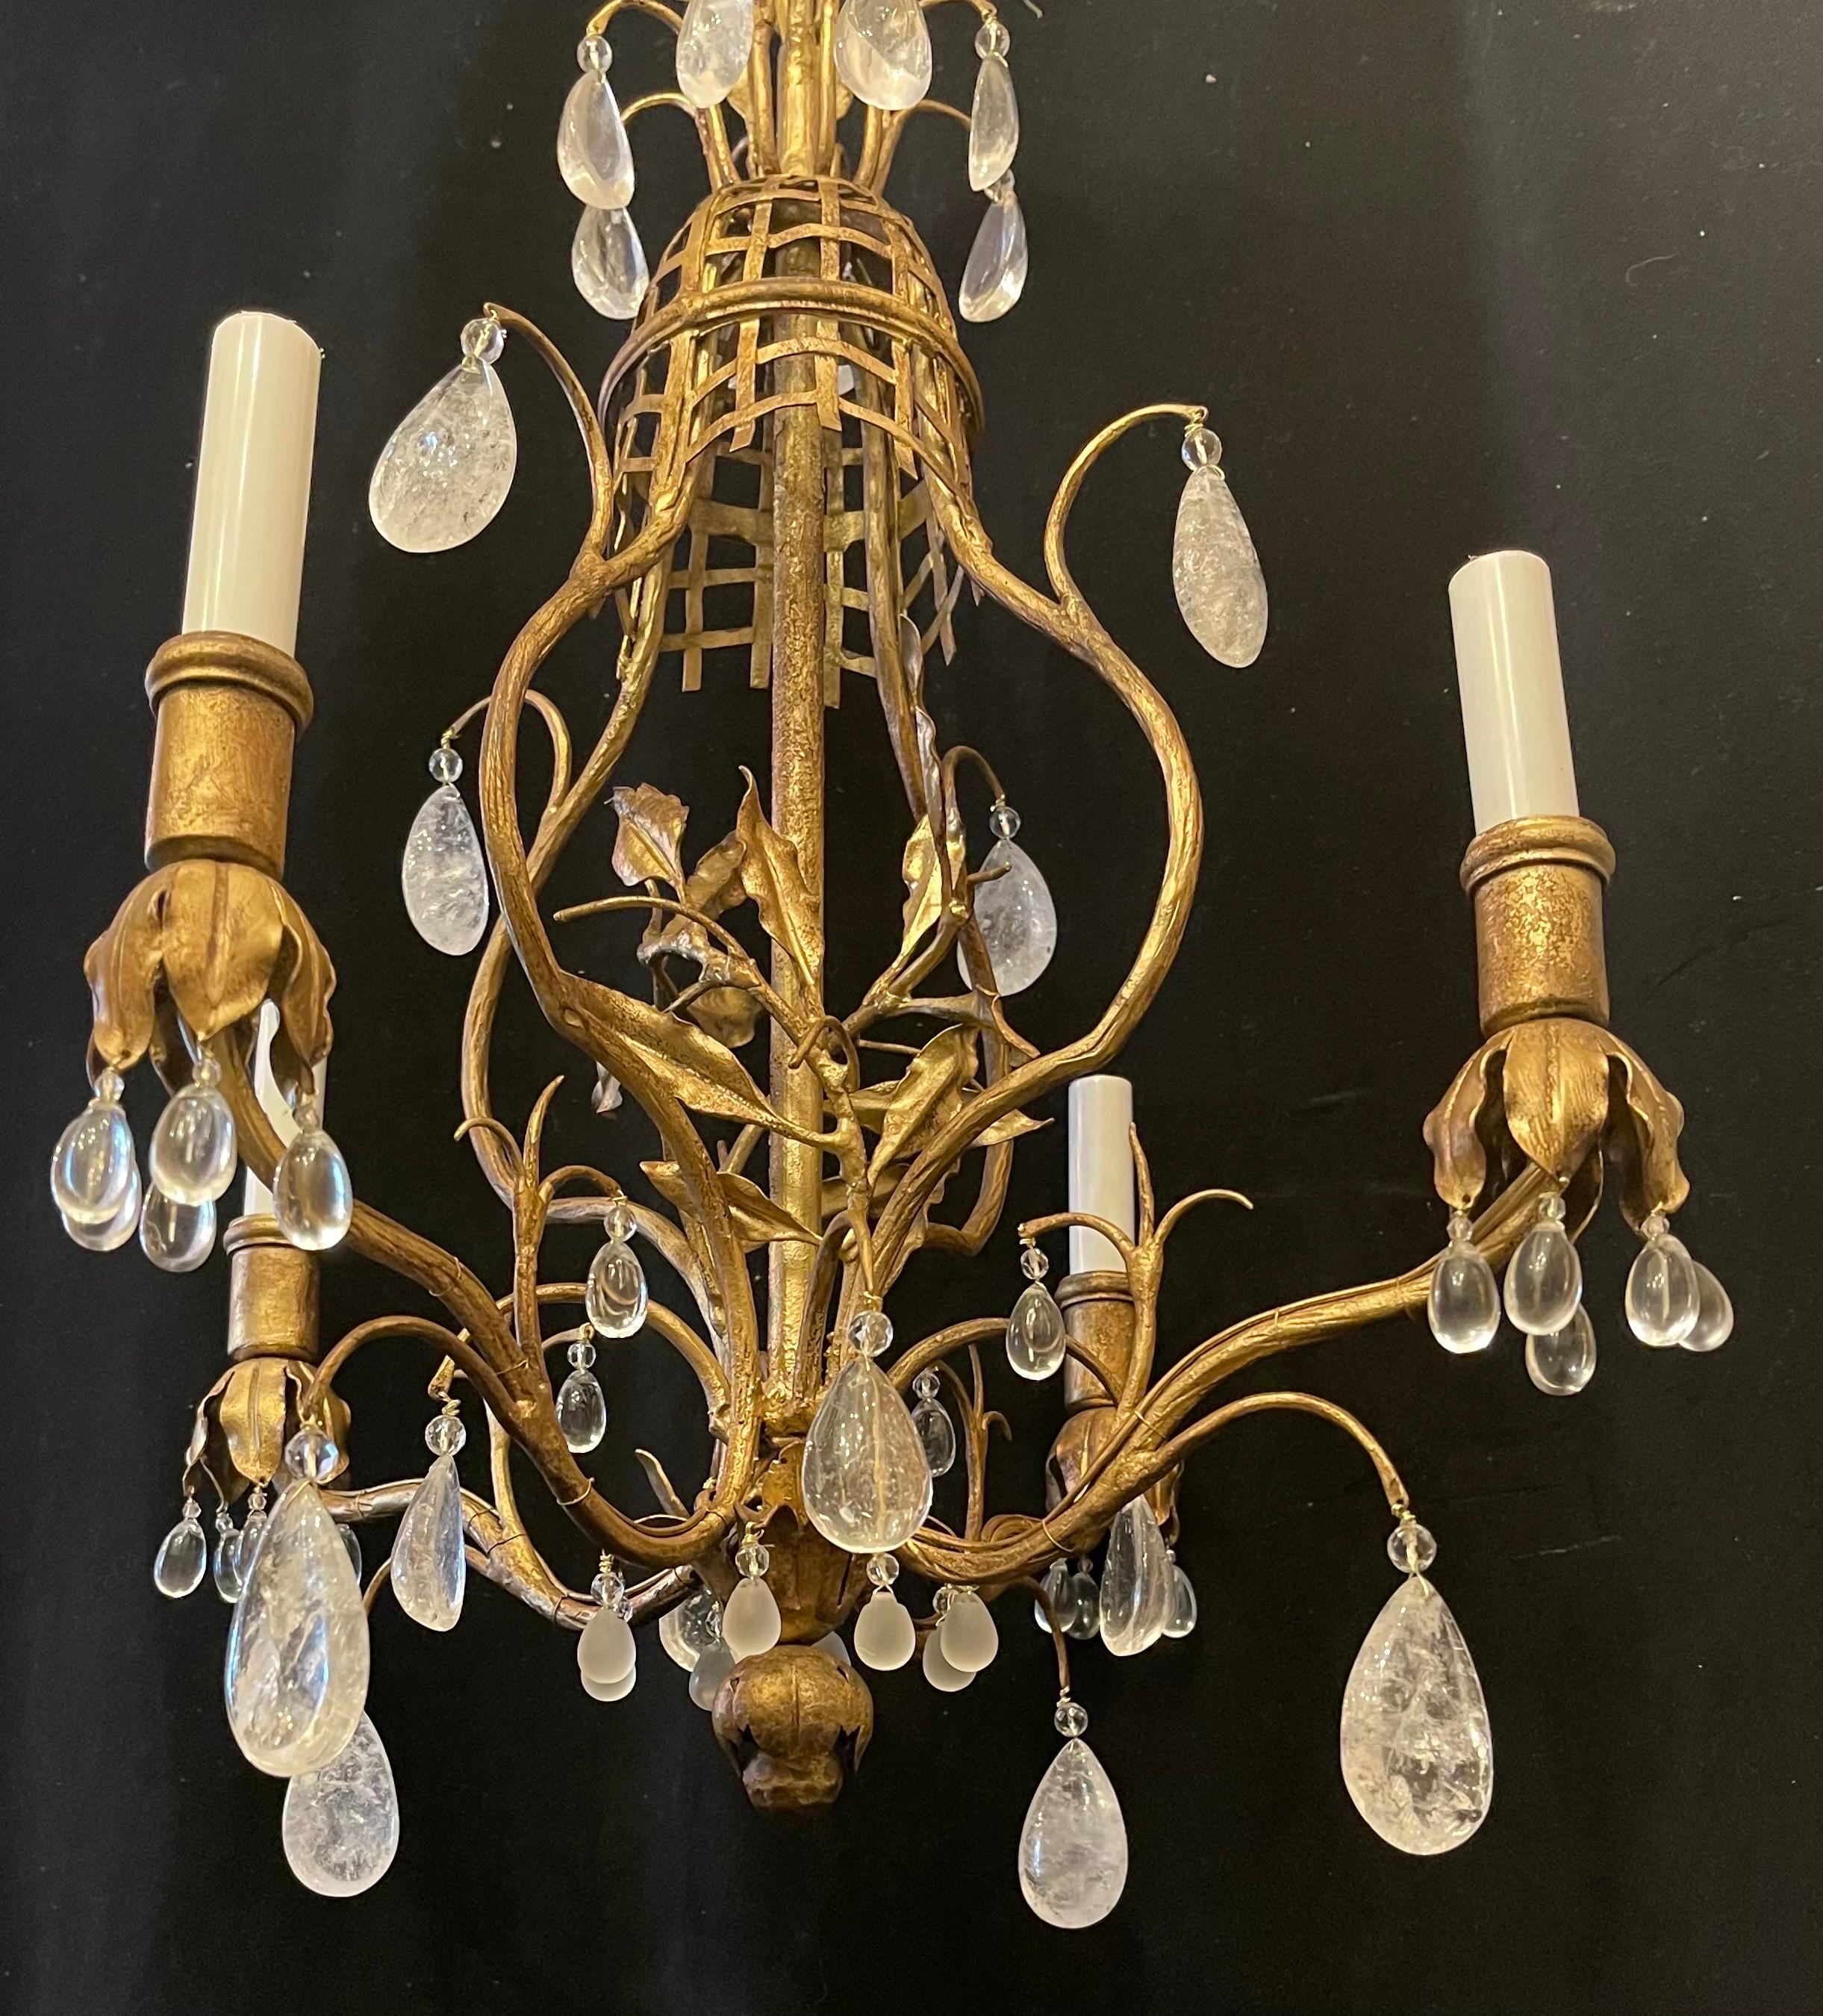 Fabulous Petite Four Light Maison Baguès Rock Crystal Gilt French Chandelier In Good Condition For Sale In Roslyn, NY